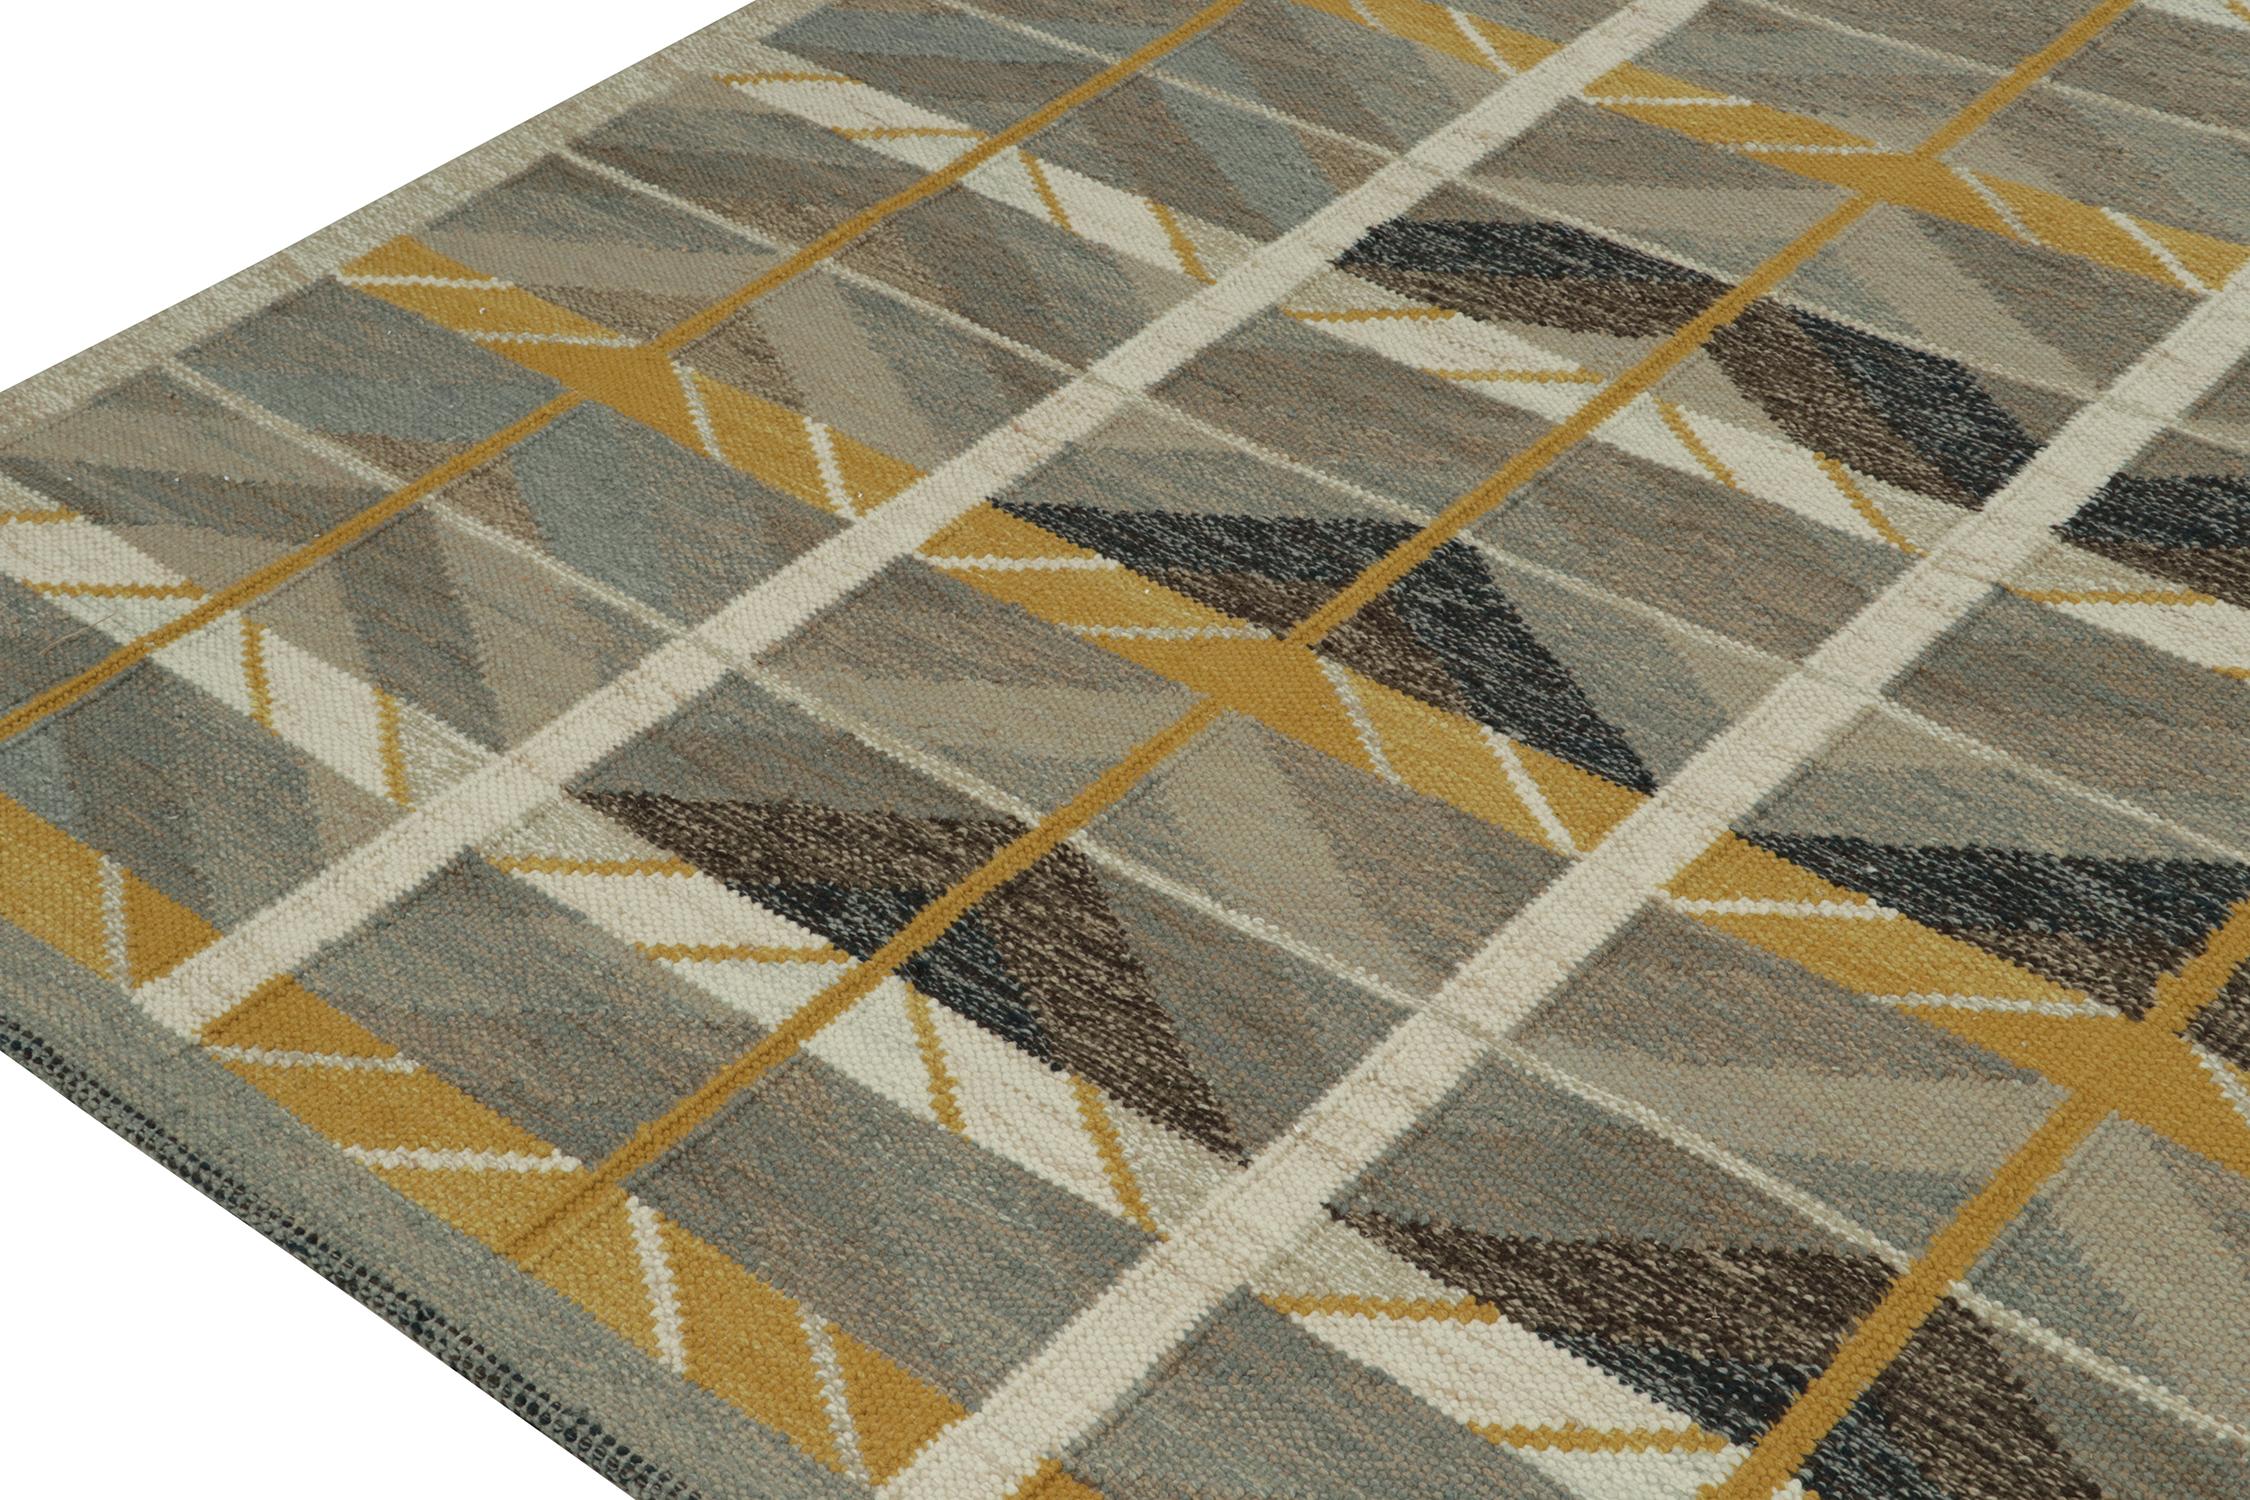 Hand-Knotted Rug & Kilim’s Scandinavian Style Kilim Rug in Beige-Brown & Gold Geometric Patte For Sale